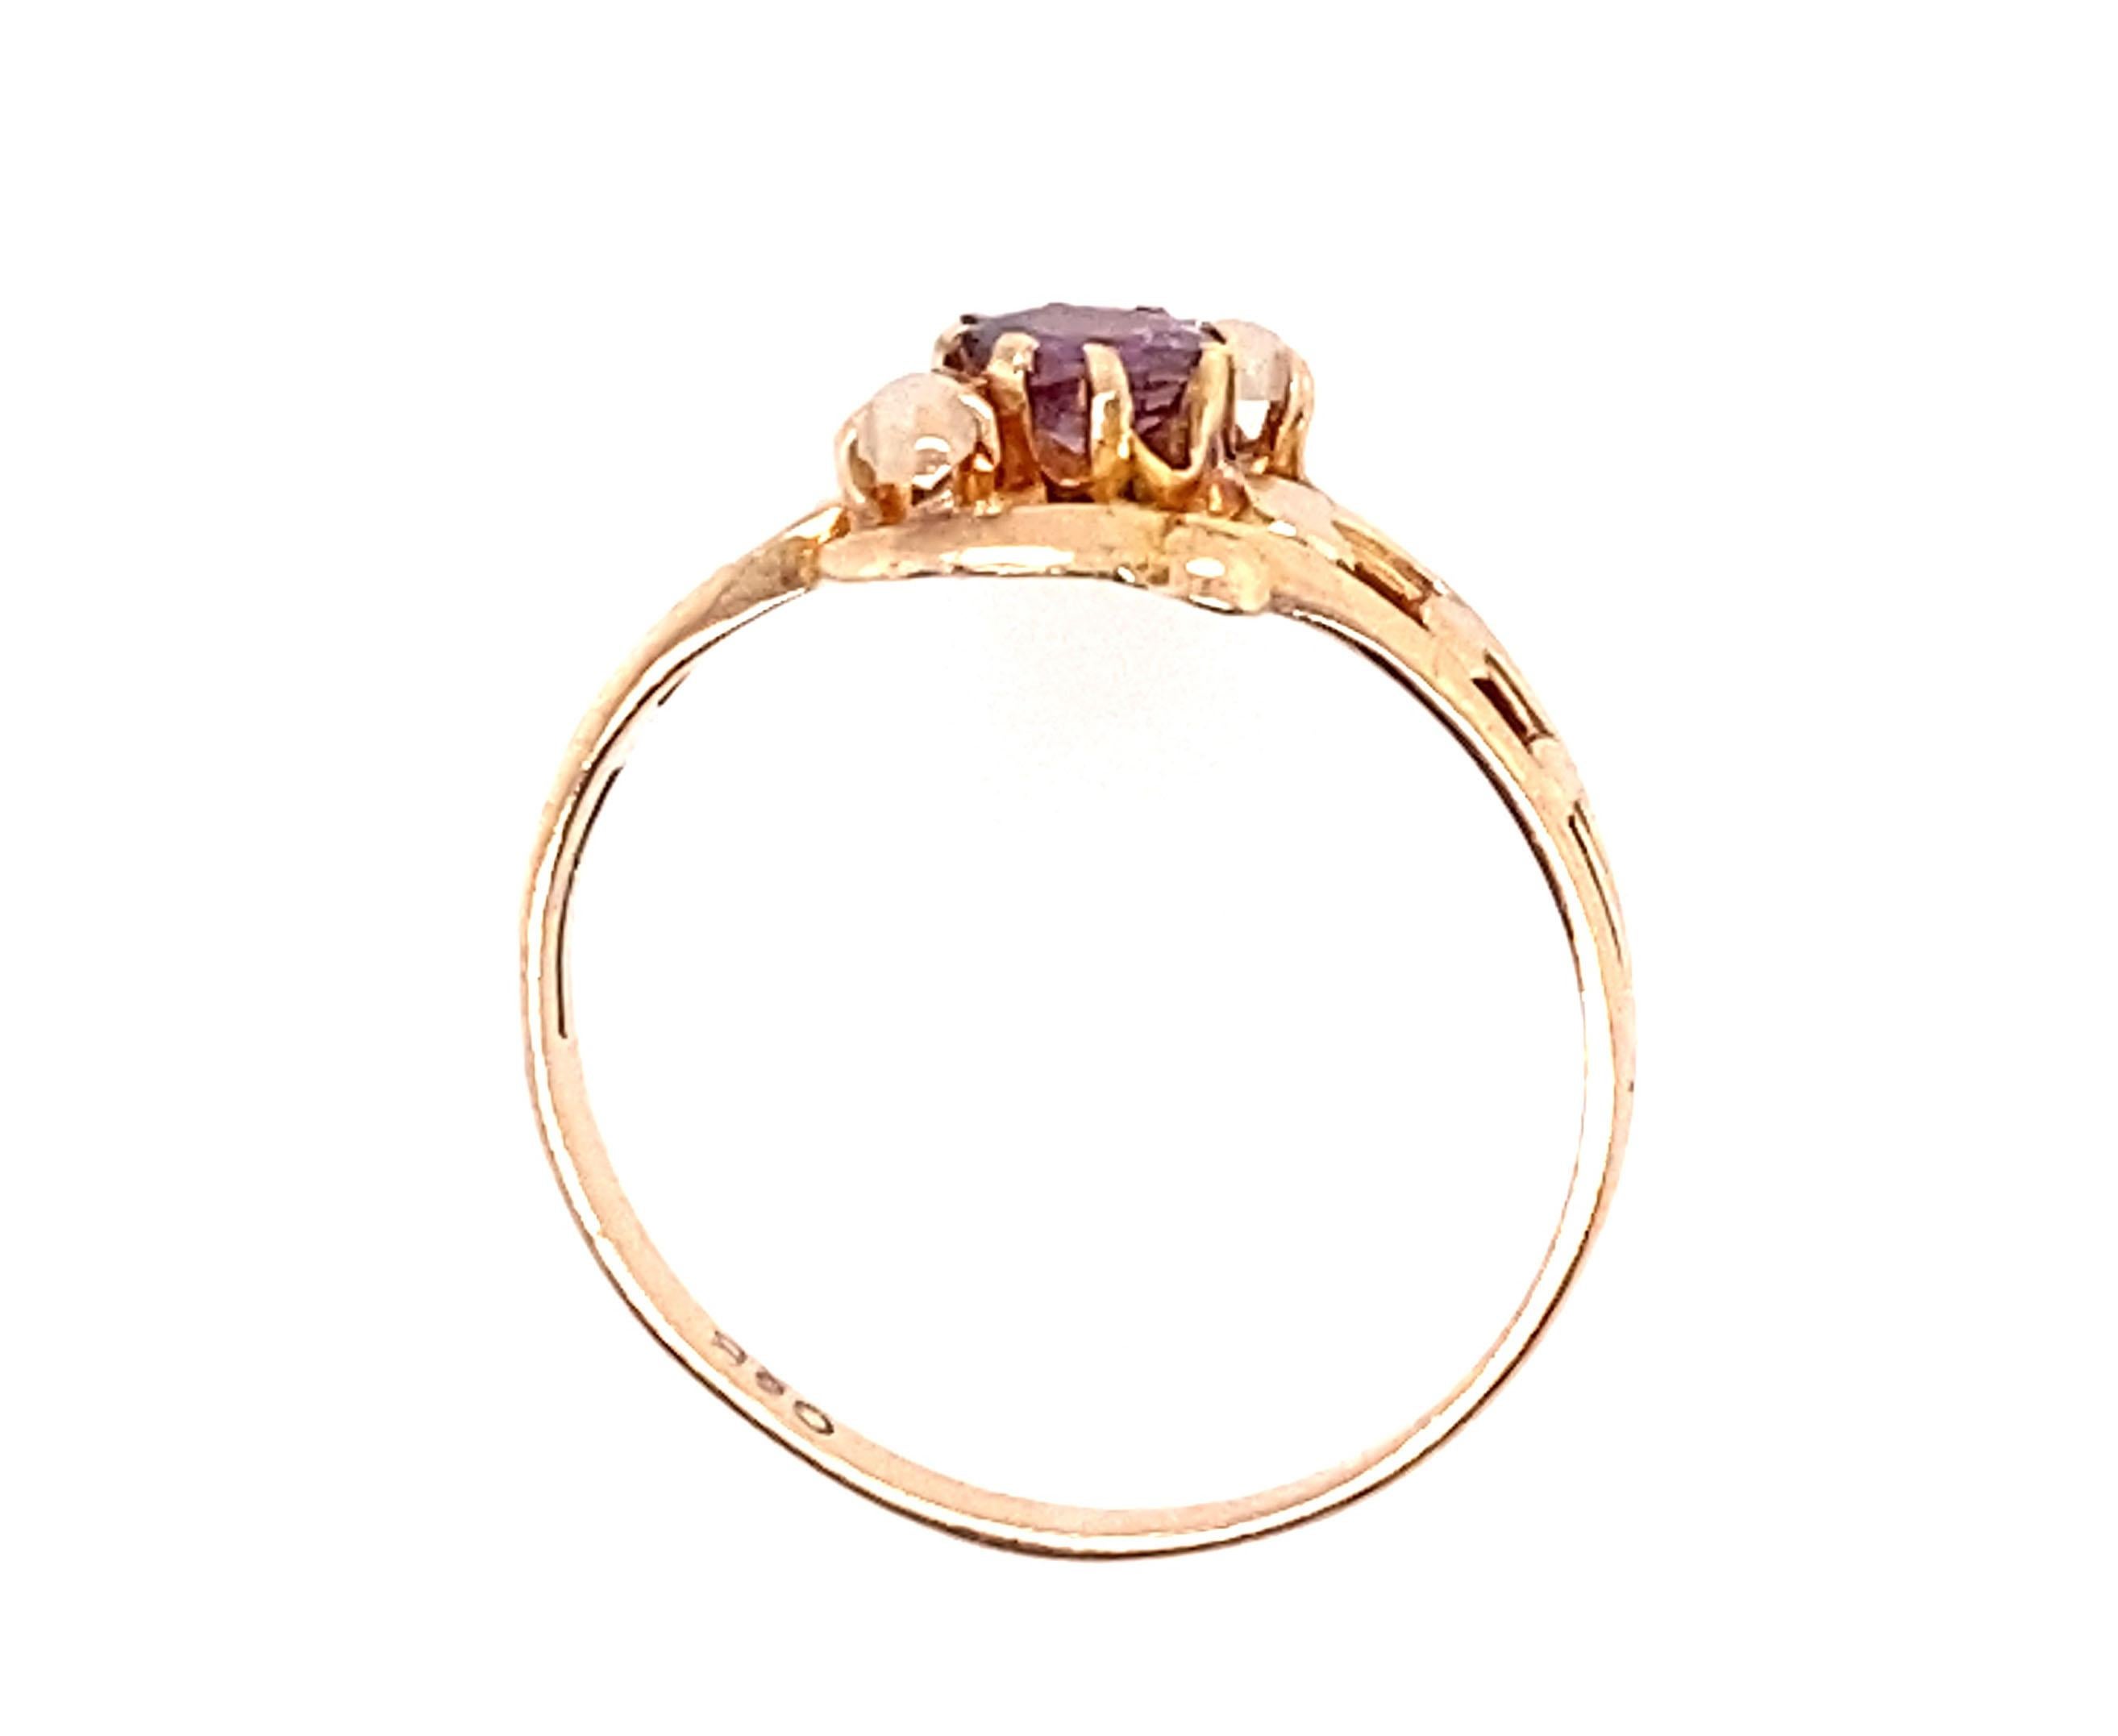 Genuine Original Victorian Antique from 1860's -1890's Amethyst Ring with Pearls .40ct 14K Yellow Gold 



Featuring Genuine Natural Round Cut .40ct Amethyst Gemstone

2 Pearls Accent Nicely 

Amethyst the Birthstone for February 

Circa